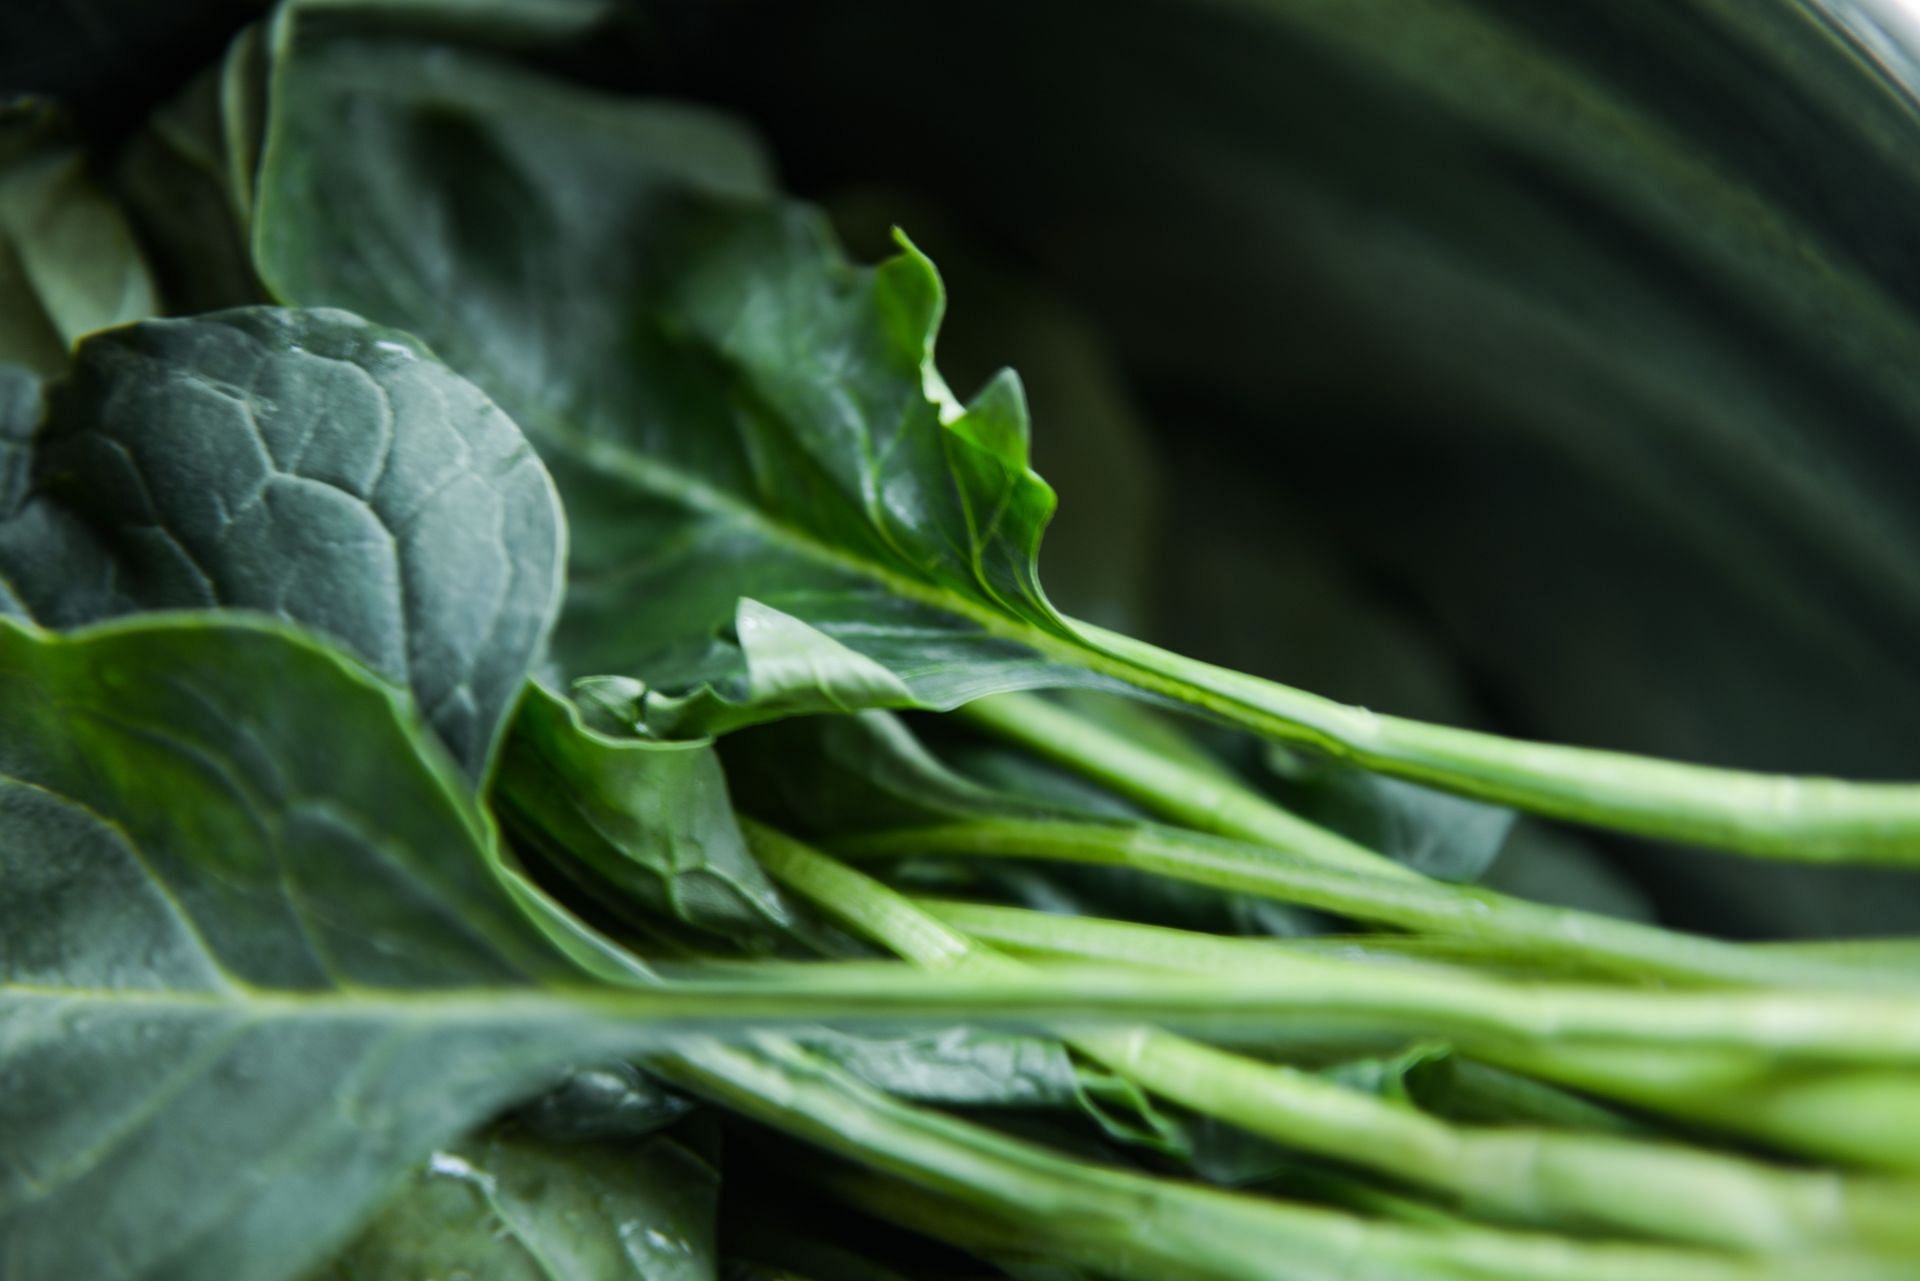 Spinach is high in iron and folate. (Image via Pexels/Cats Coming)